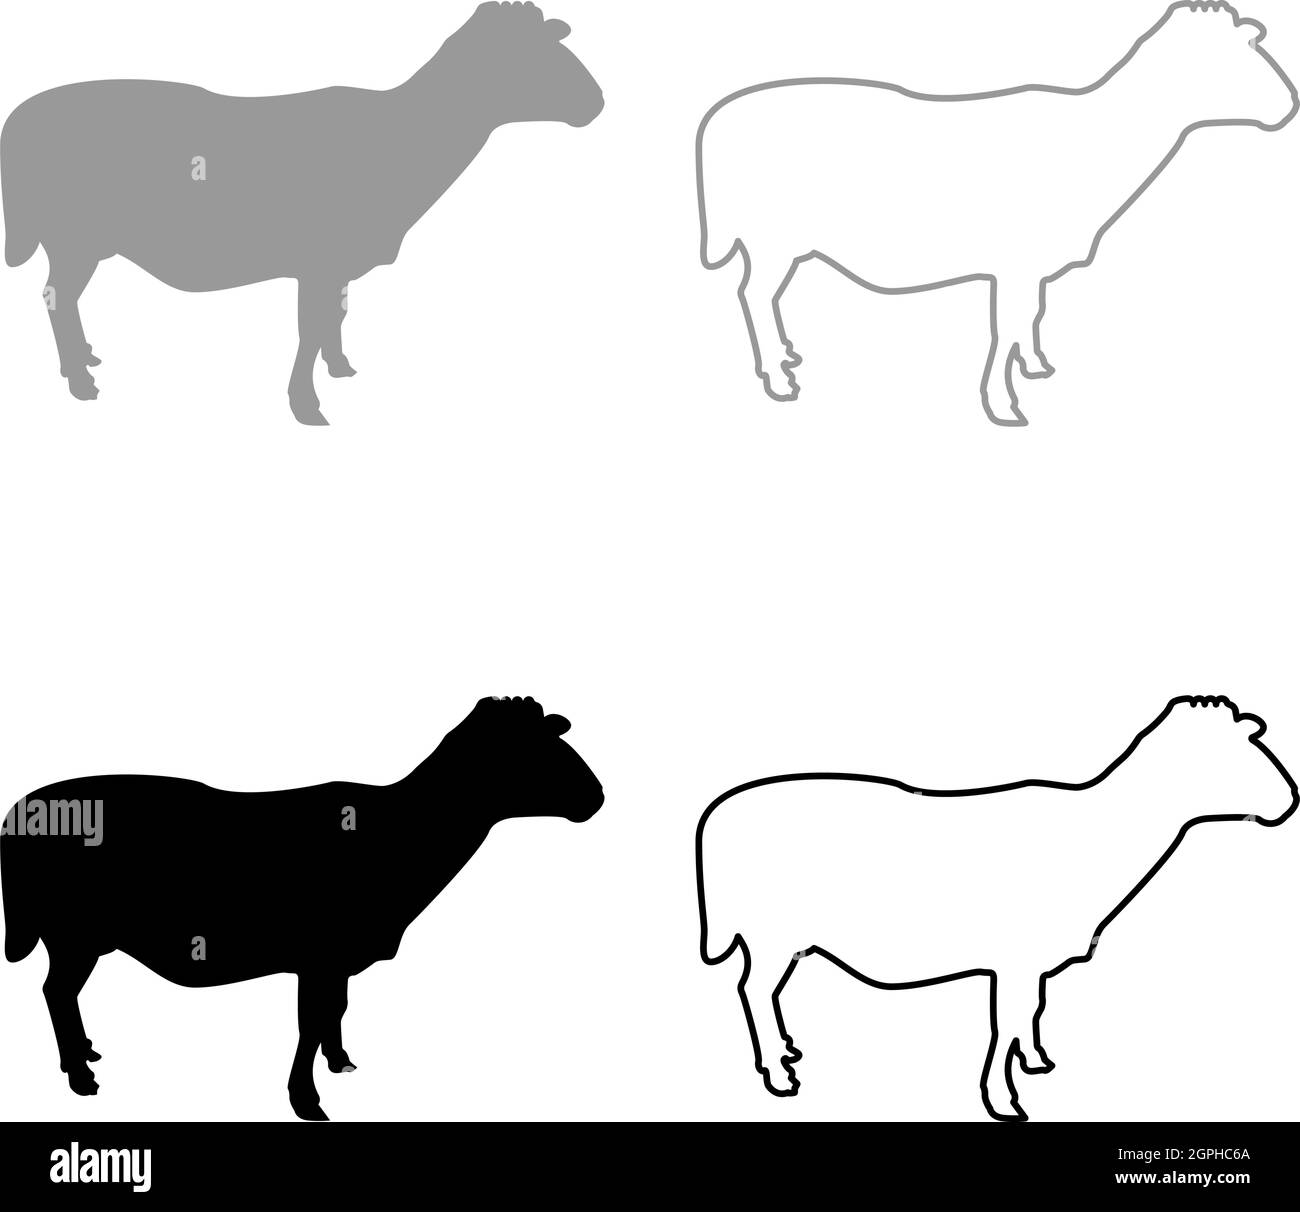 Sheep Ewe Domestic livestock Farm animal cloven hoofed Lamb cattle silhouette grey black color vector illustration solid outline style image Stock Vector